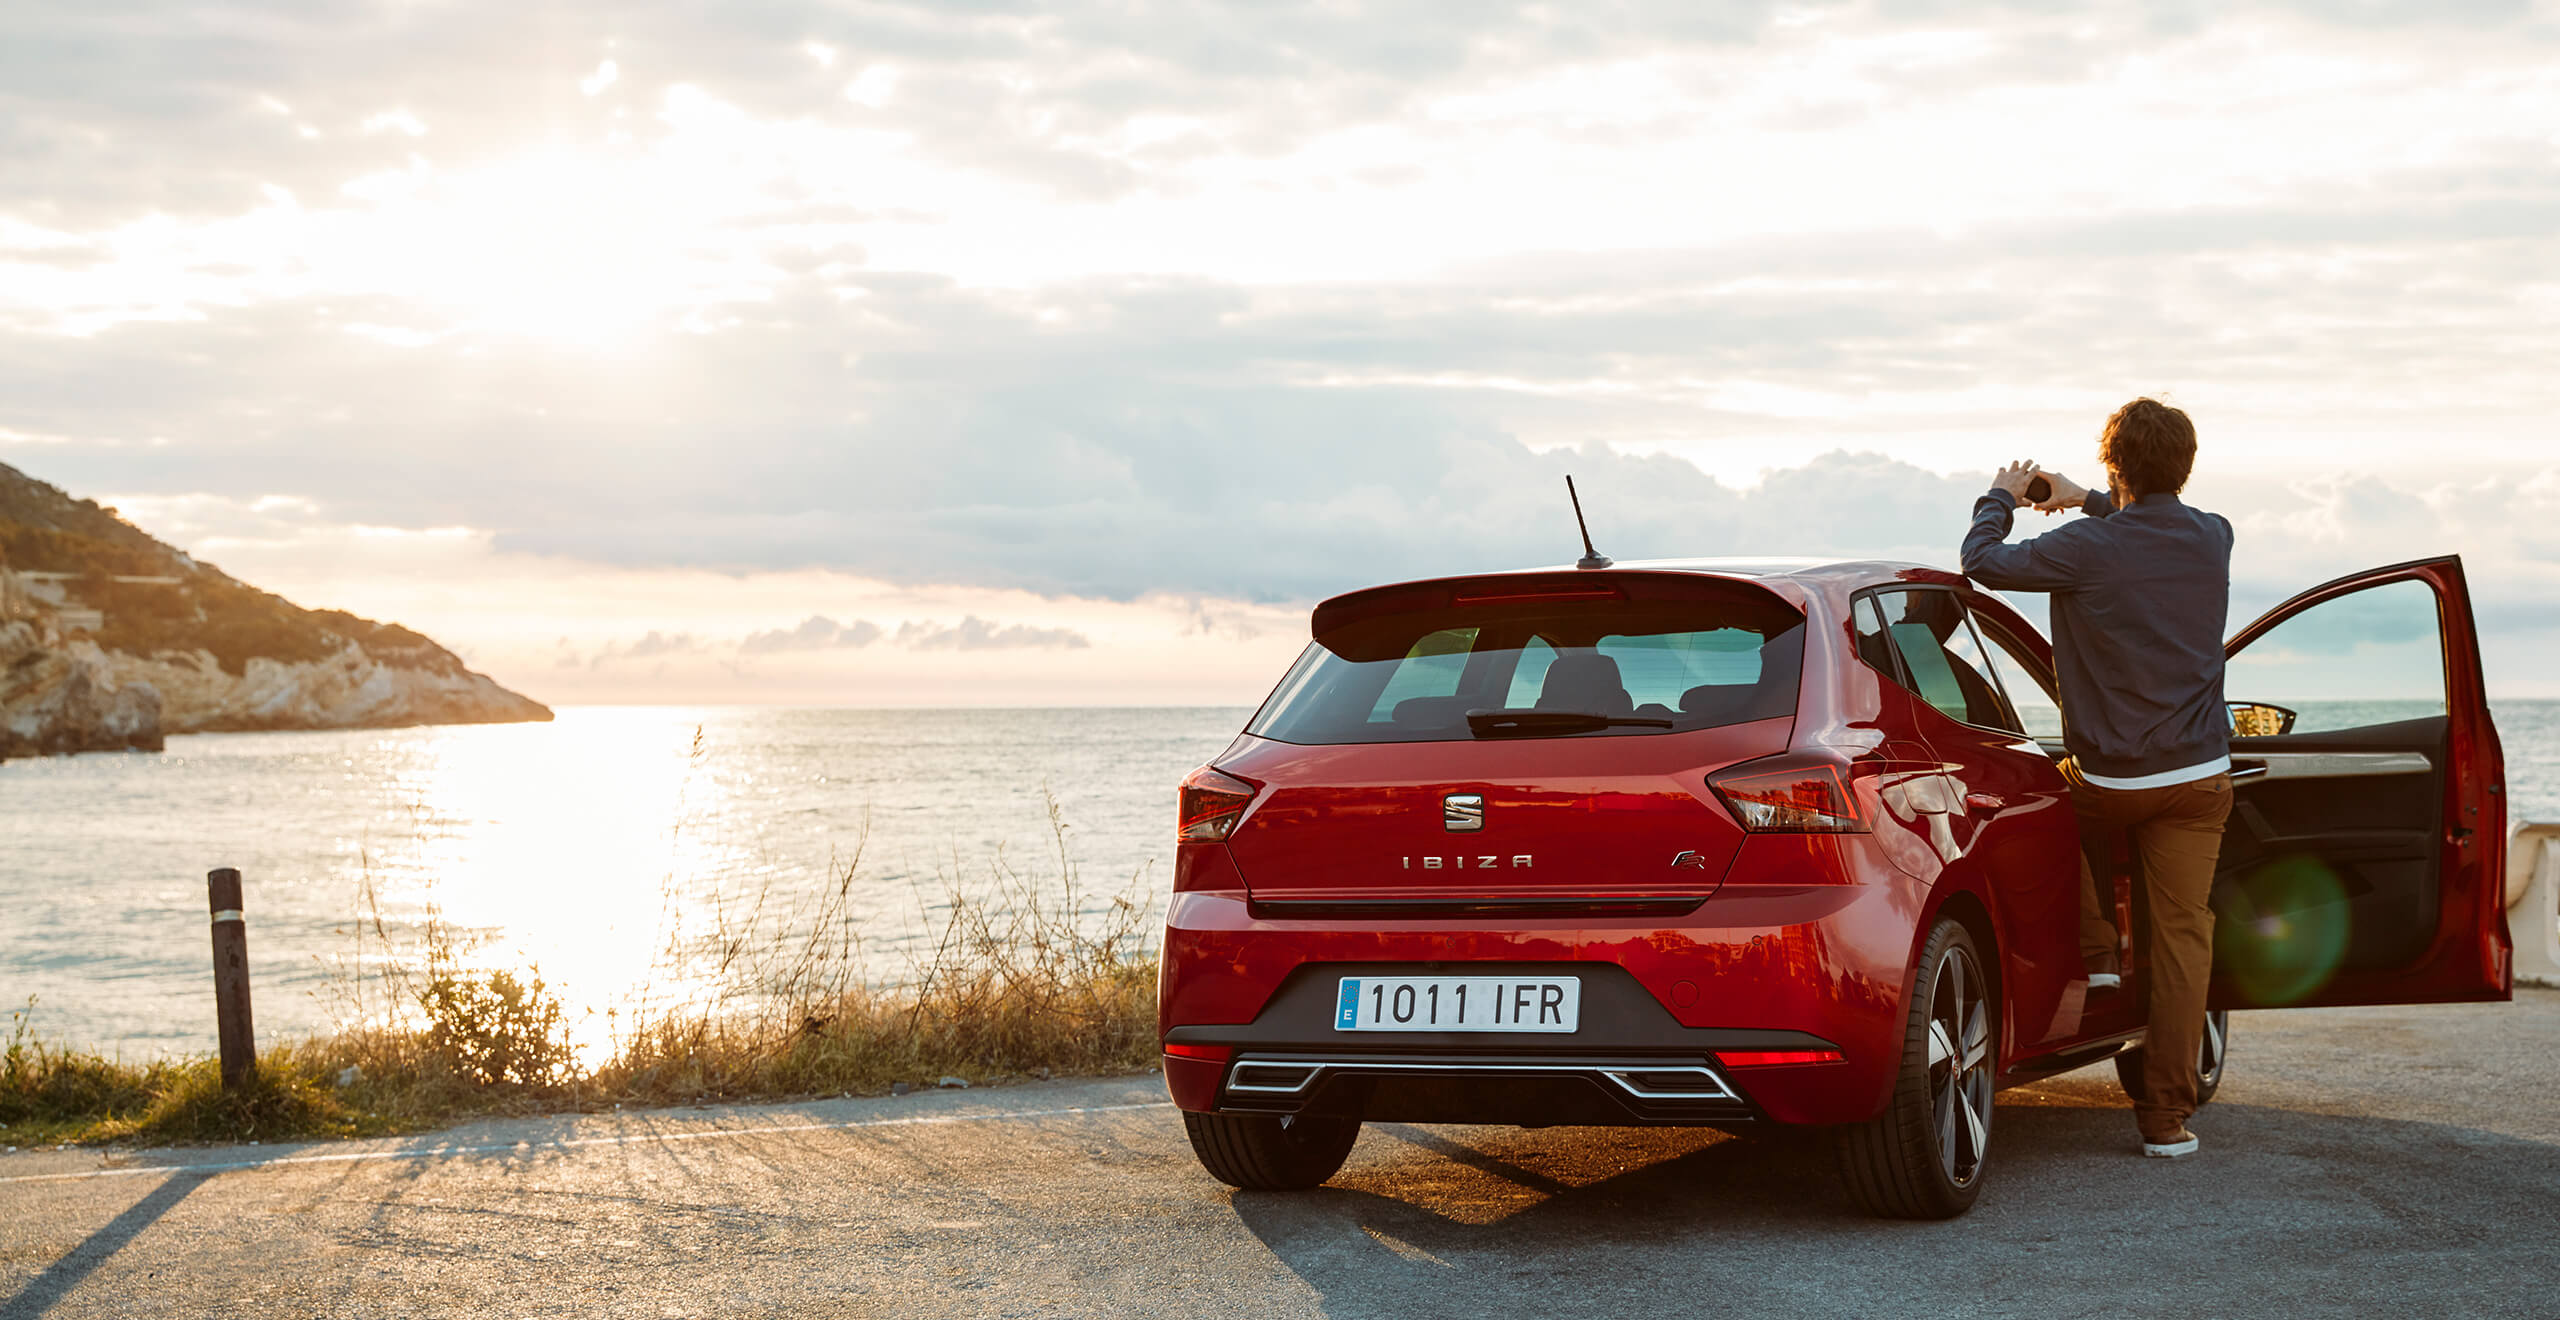 SEAT new car services and My SEAT App – SEAT Ibiza city car hatchback overlooking the sea with a man taking a photograph